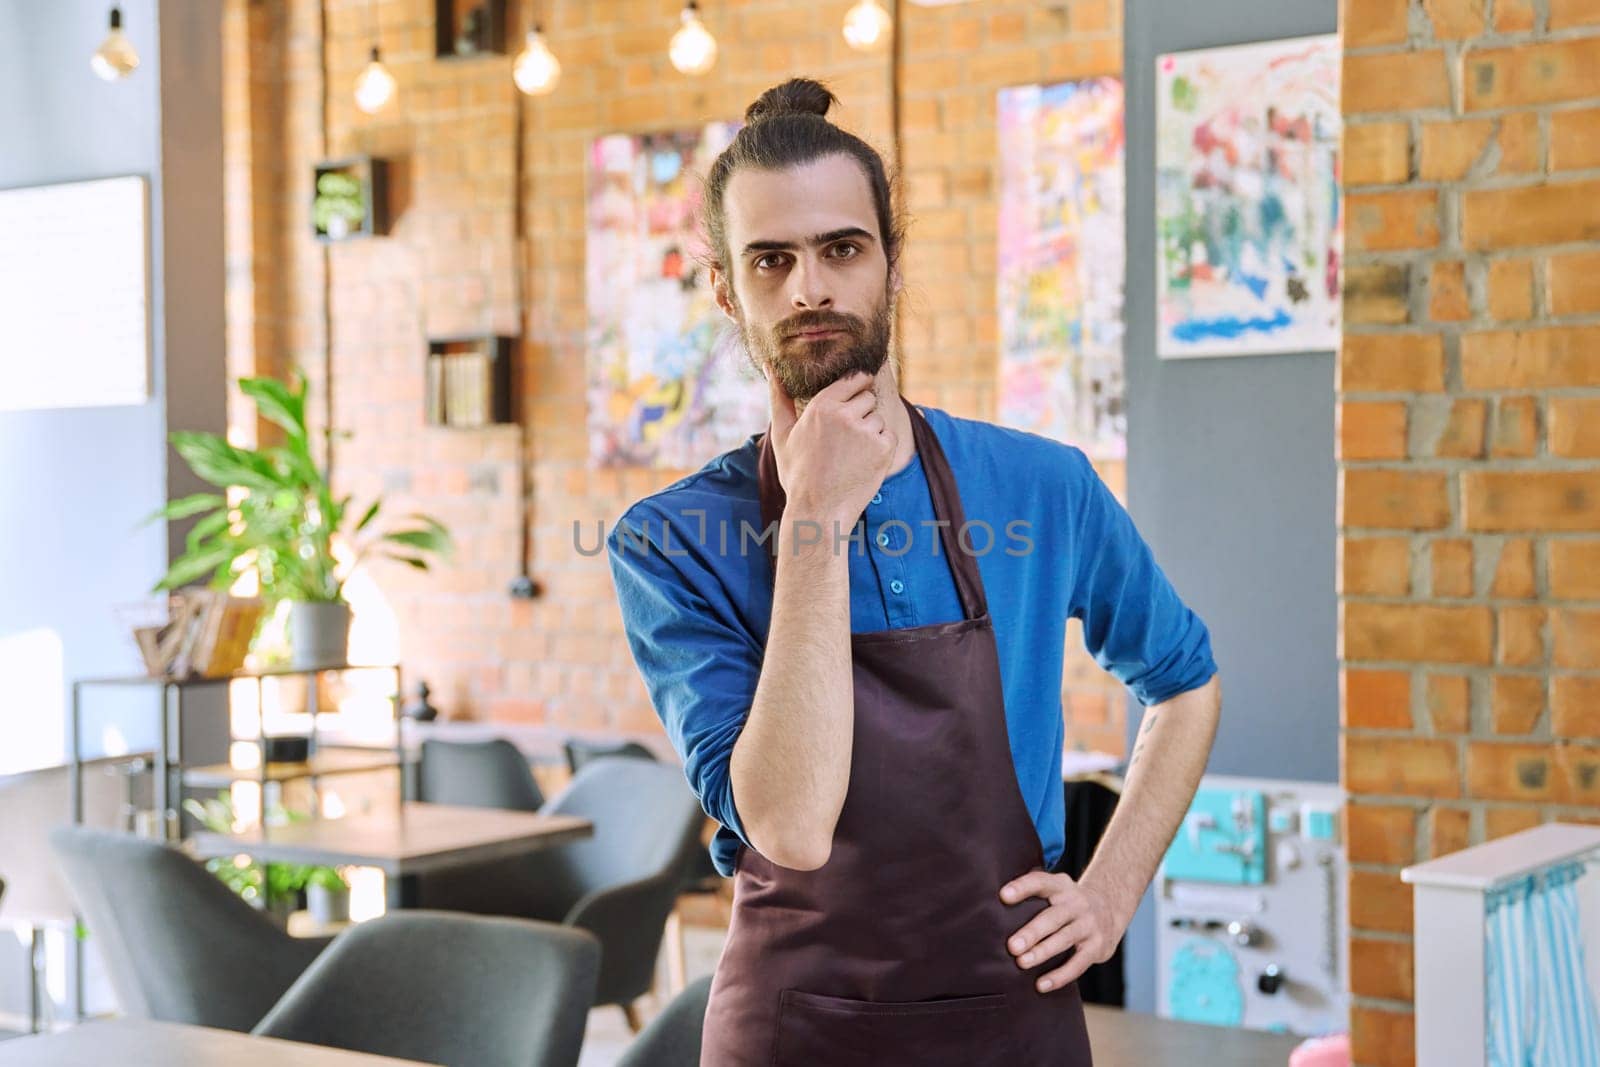 Confident successful young man service worker owner in apron posing looking at camera in restaurant cafeteria coffee pastry shop interior. Small business staff occupation entrepreneur work